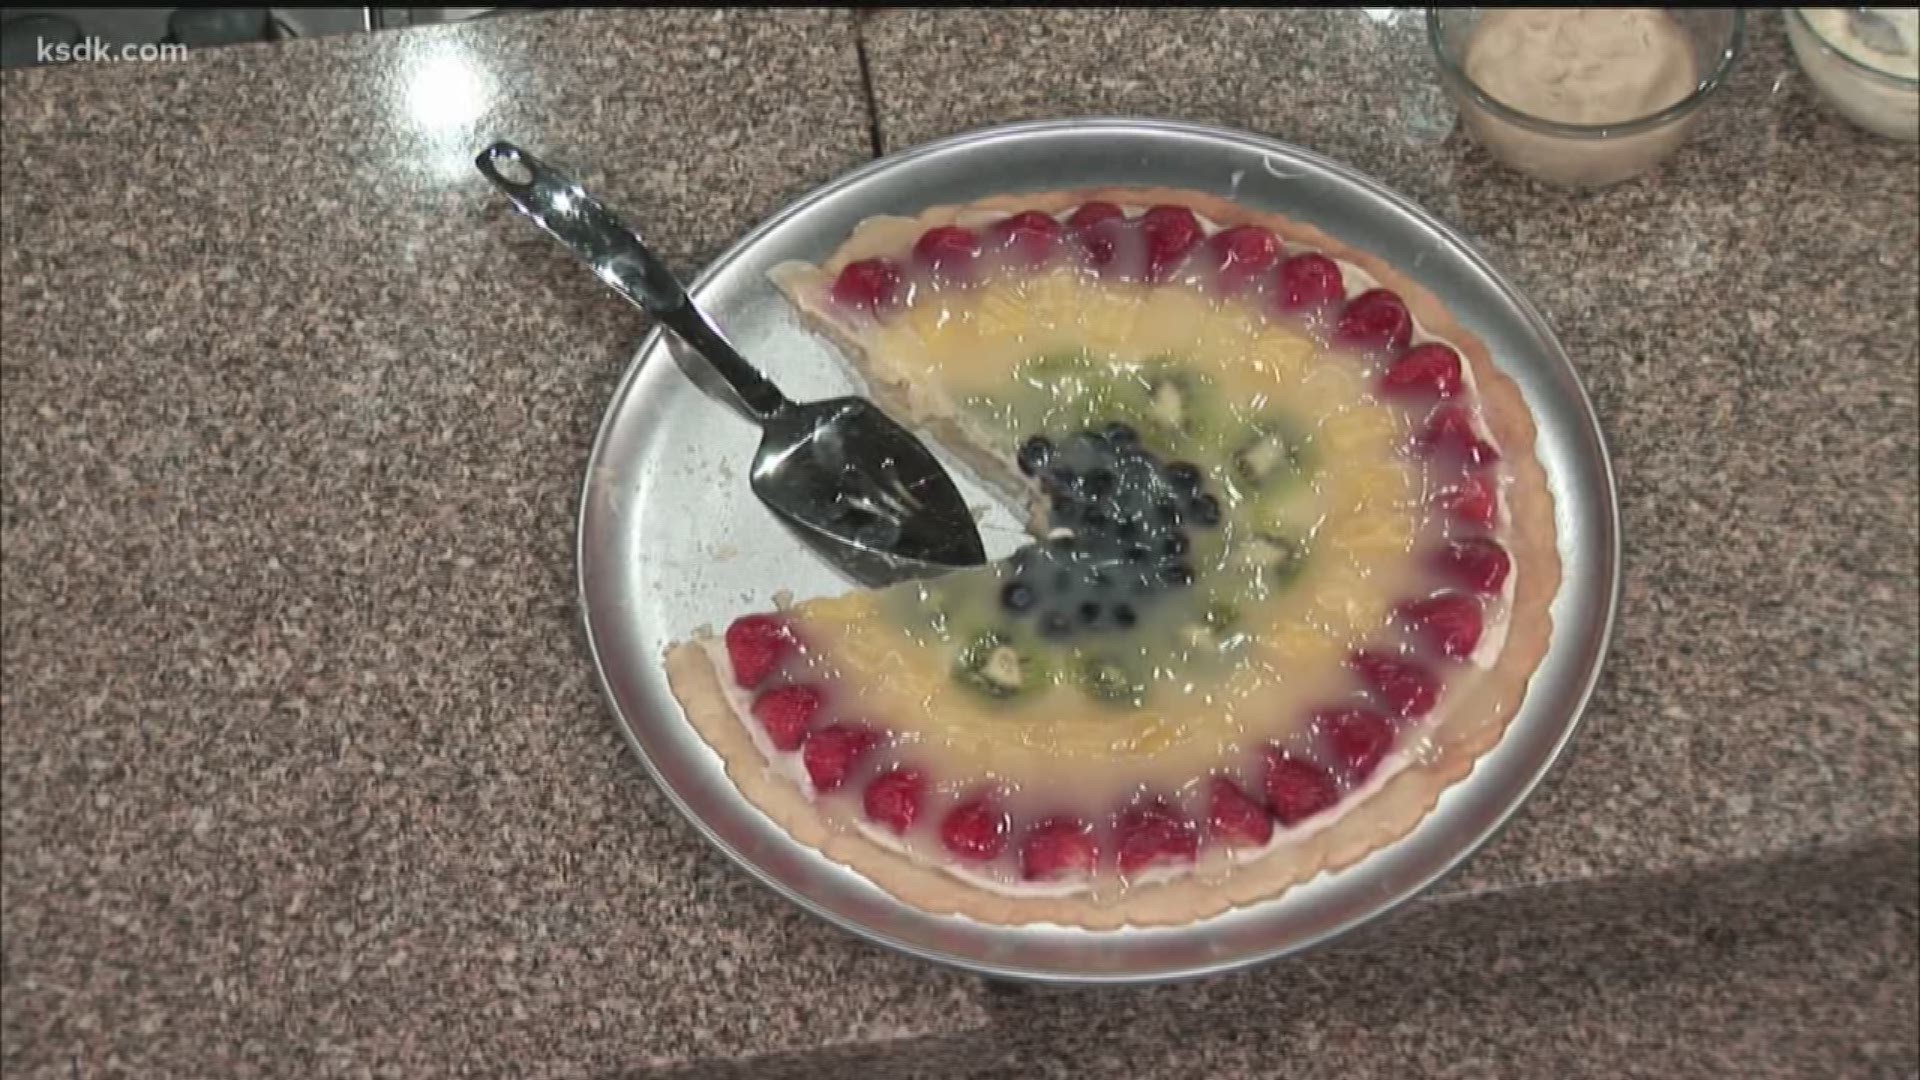 Judy Smith and Patty Wrigley from 'A Teacher and an Oven' blog share a recipe for Fruit Pizza.